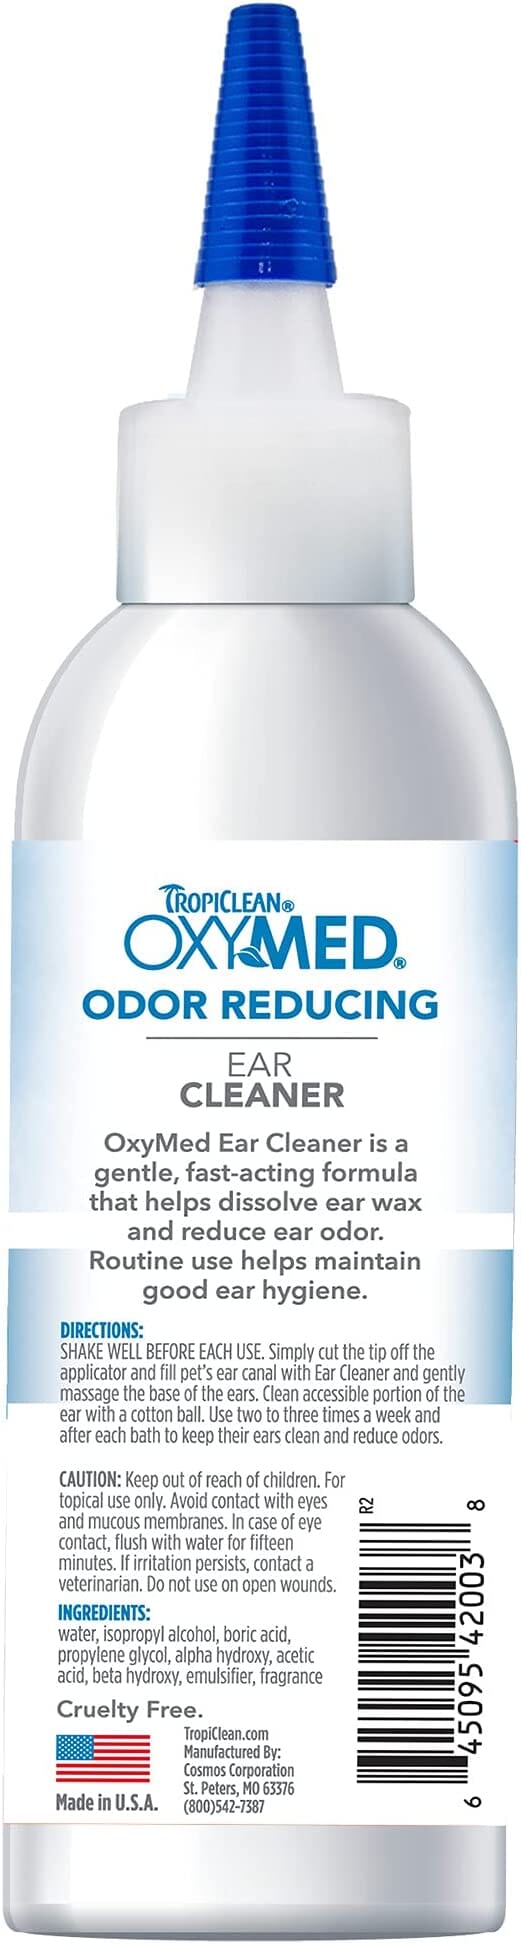 TropiClean OxyMed Ear Cleaner for Dogs and Cats - TropiClean Pet